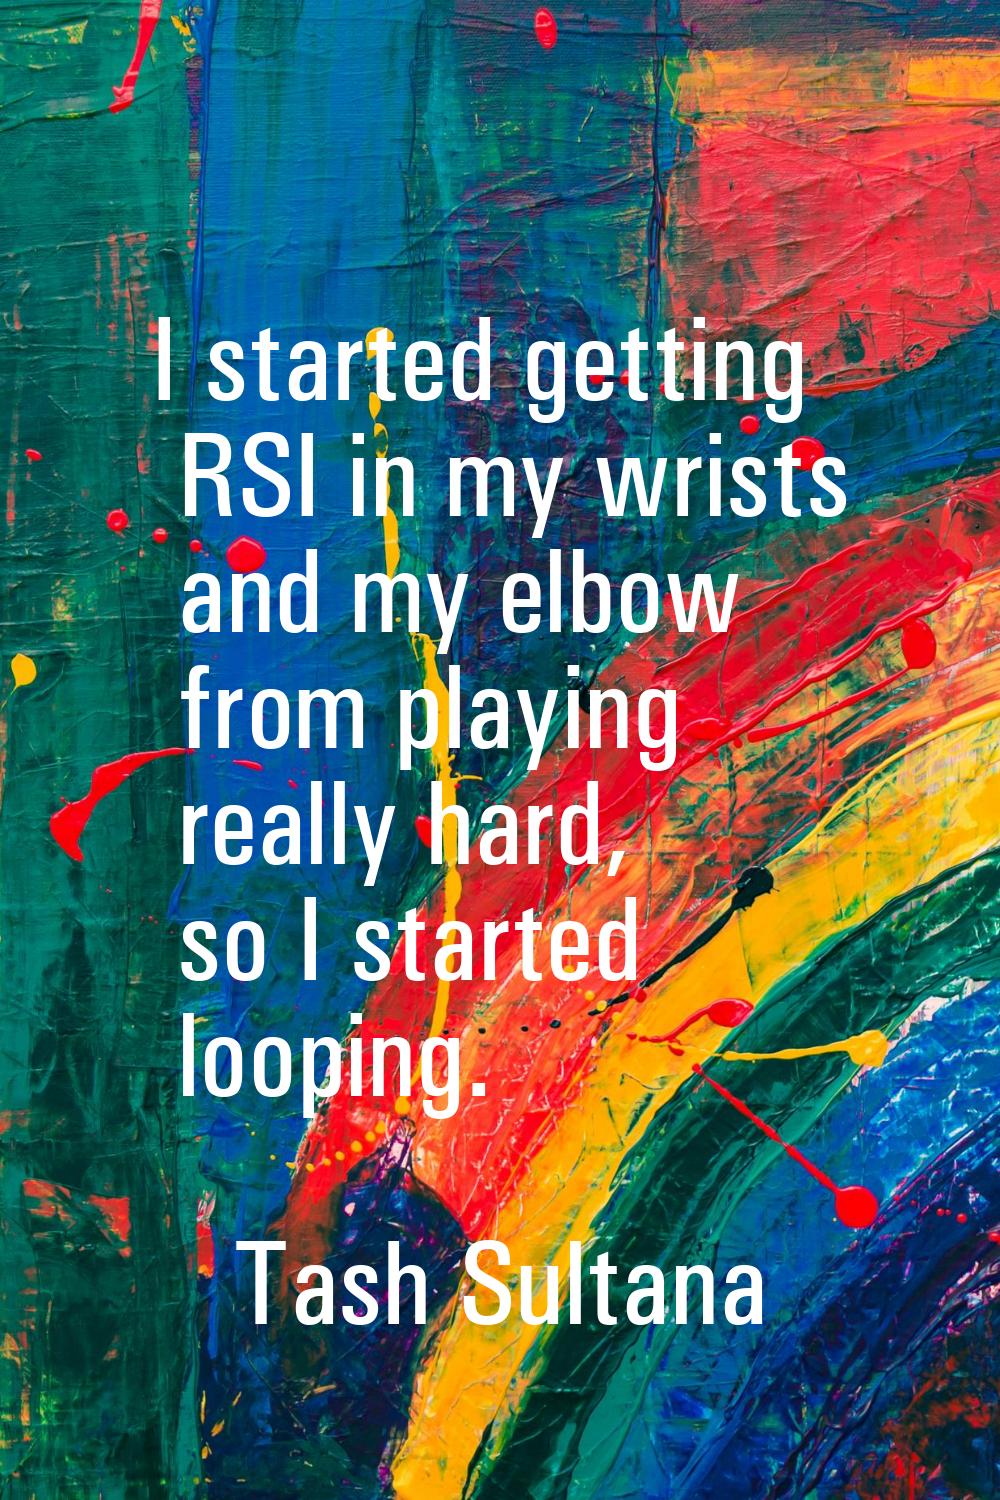 I started getting RSI in my wrists and my elbow from playing really hard, so I started looping.